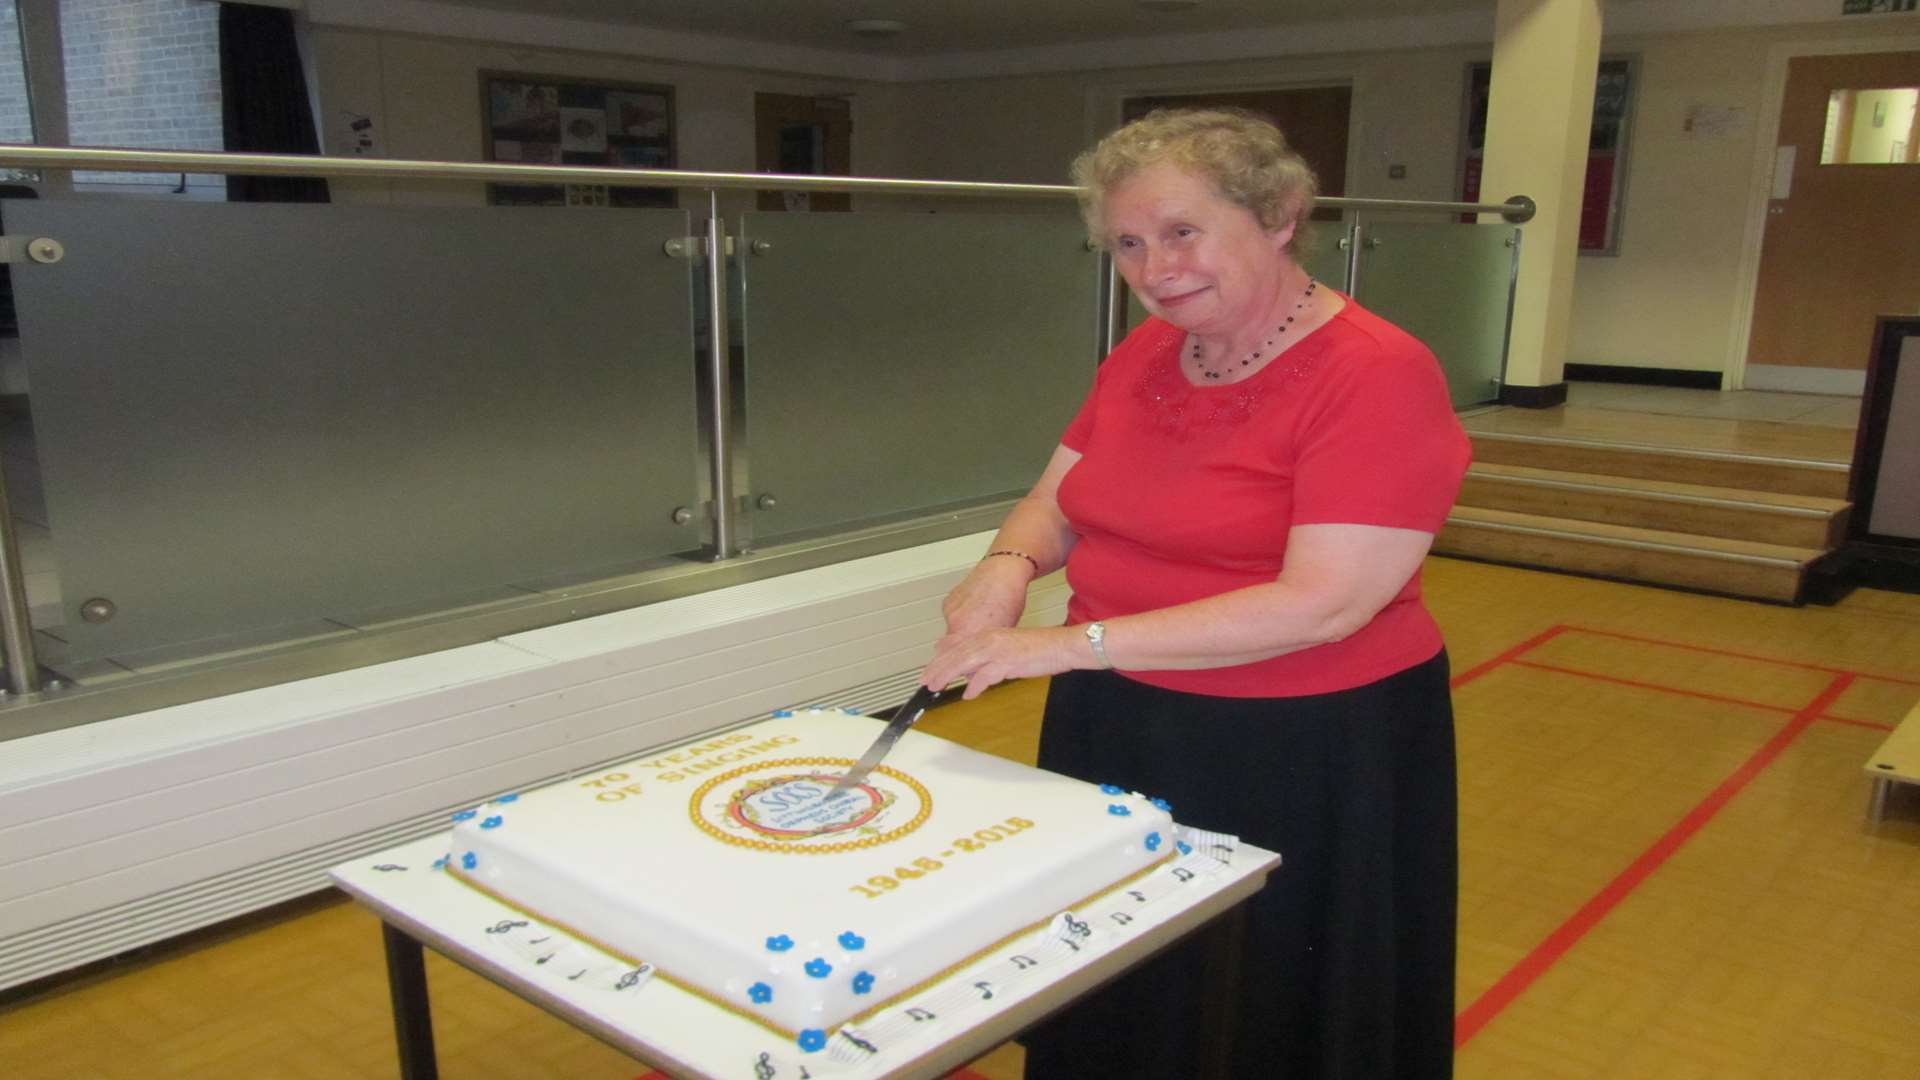 Dot Mills, second longest serving member of the choir, who joined in 1971, cutting the cake